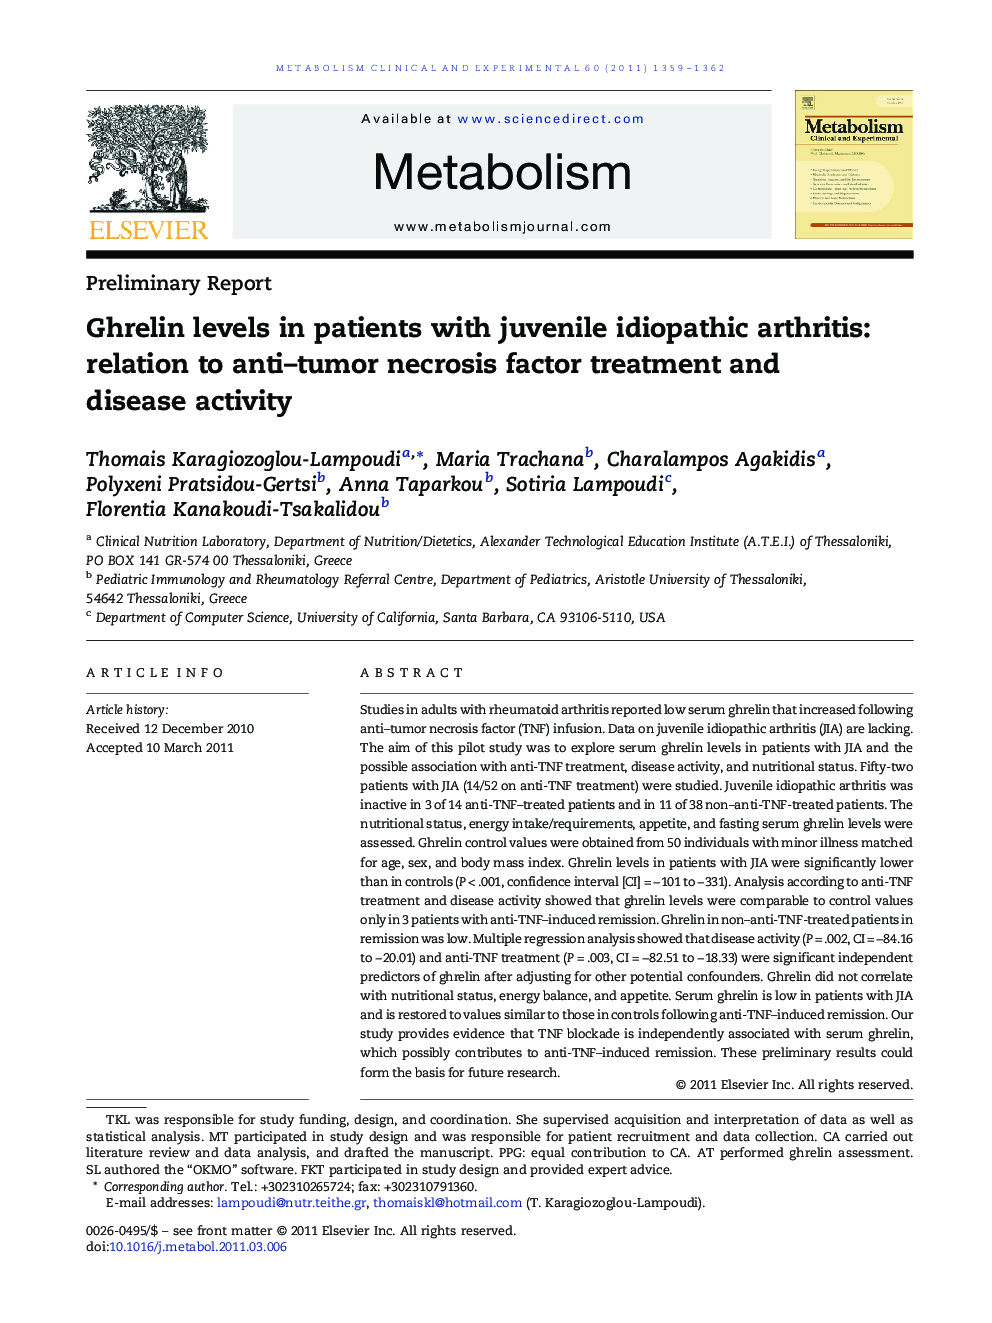 Ghrelin levels in patients with juvenile idiopathic arthritis: relation to anti-tumor necrosis factor treatment and disease activity